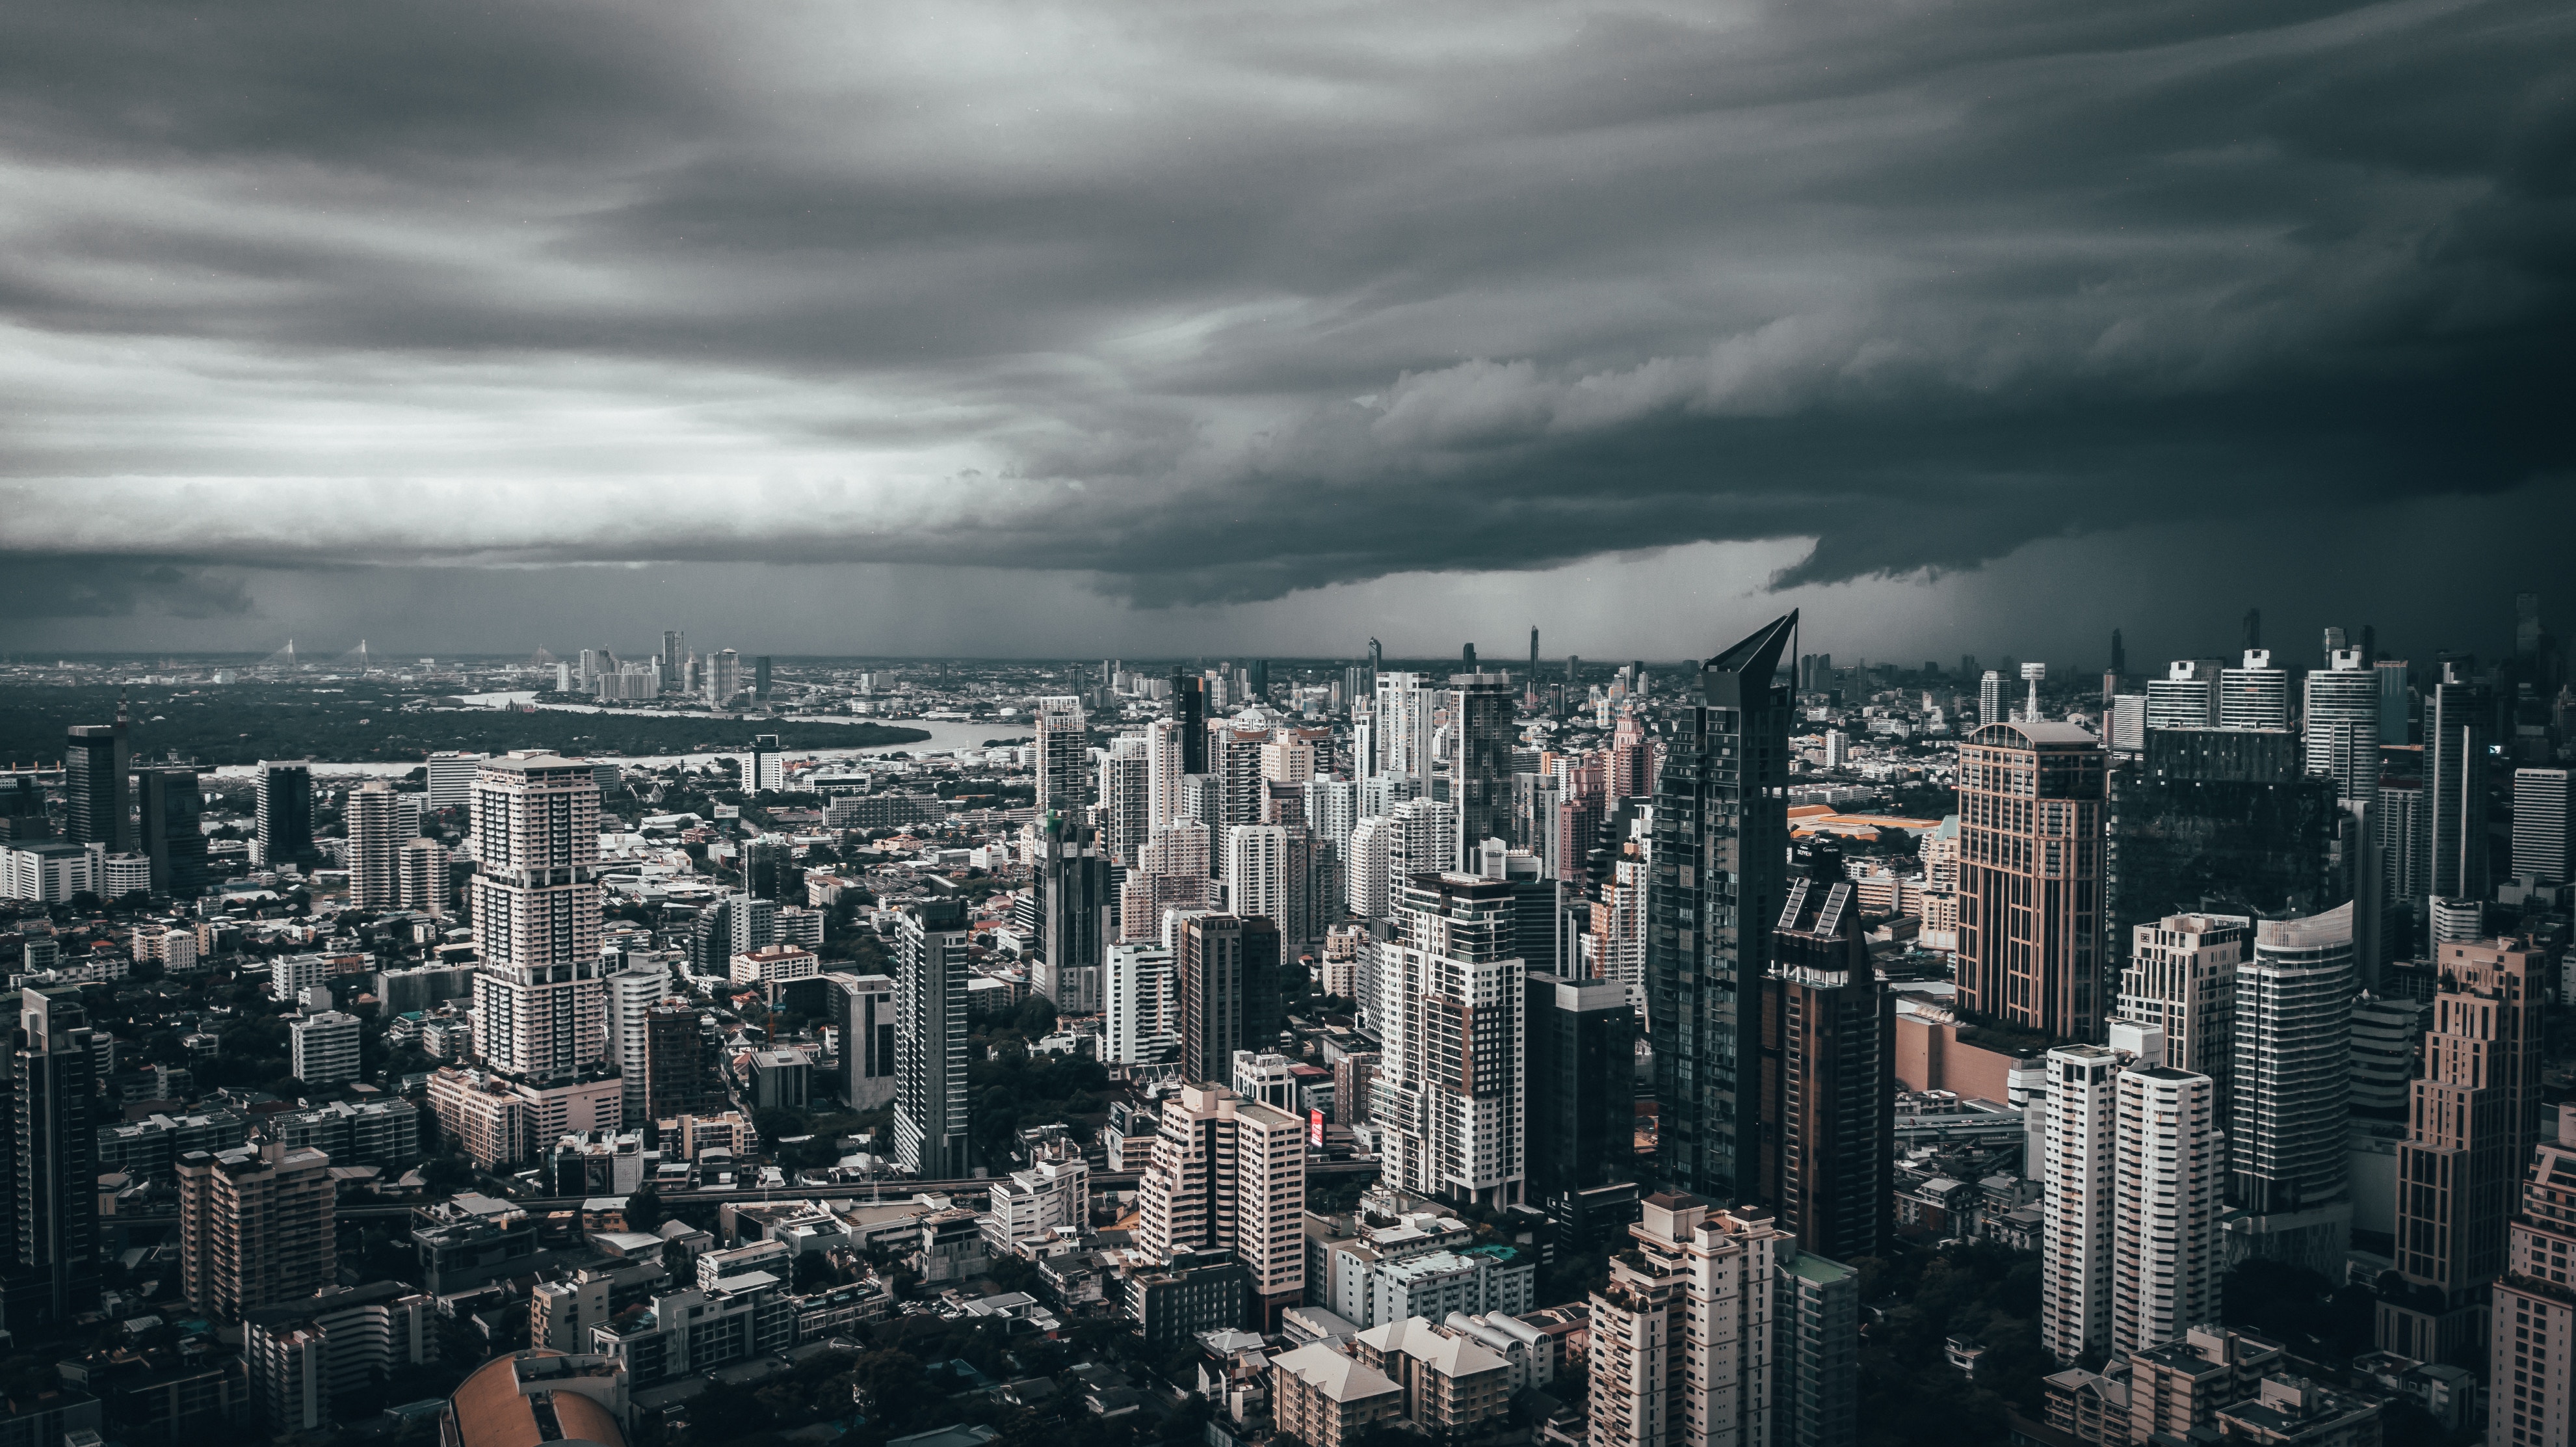 1920x1080 Background mainly cloudy, cities, clouds, city, view from above, skyscrapers, overcast